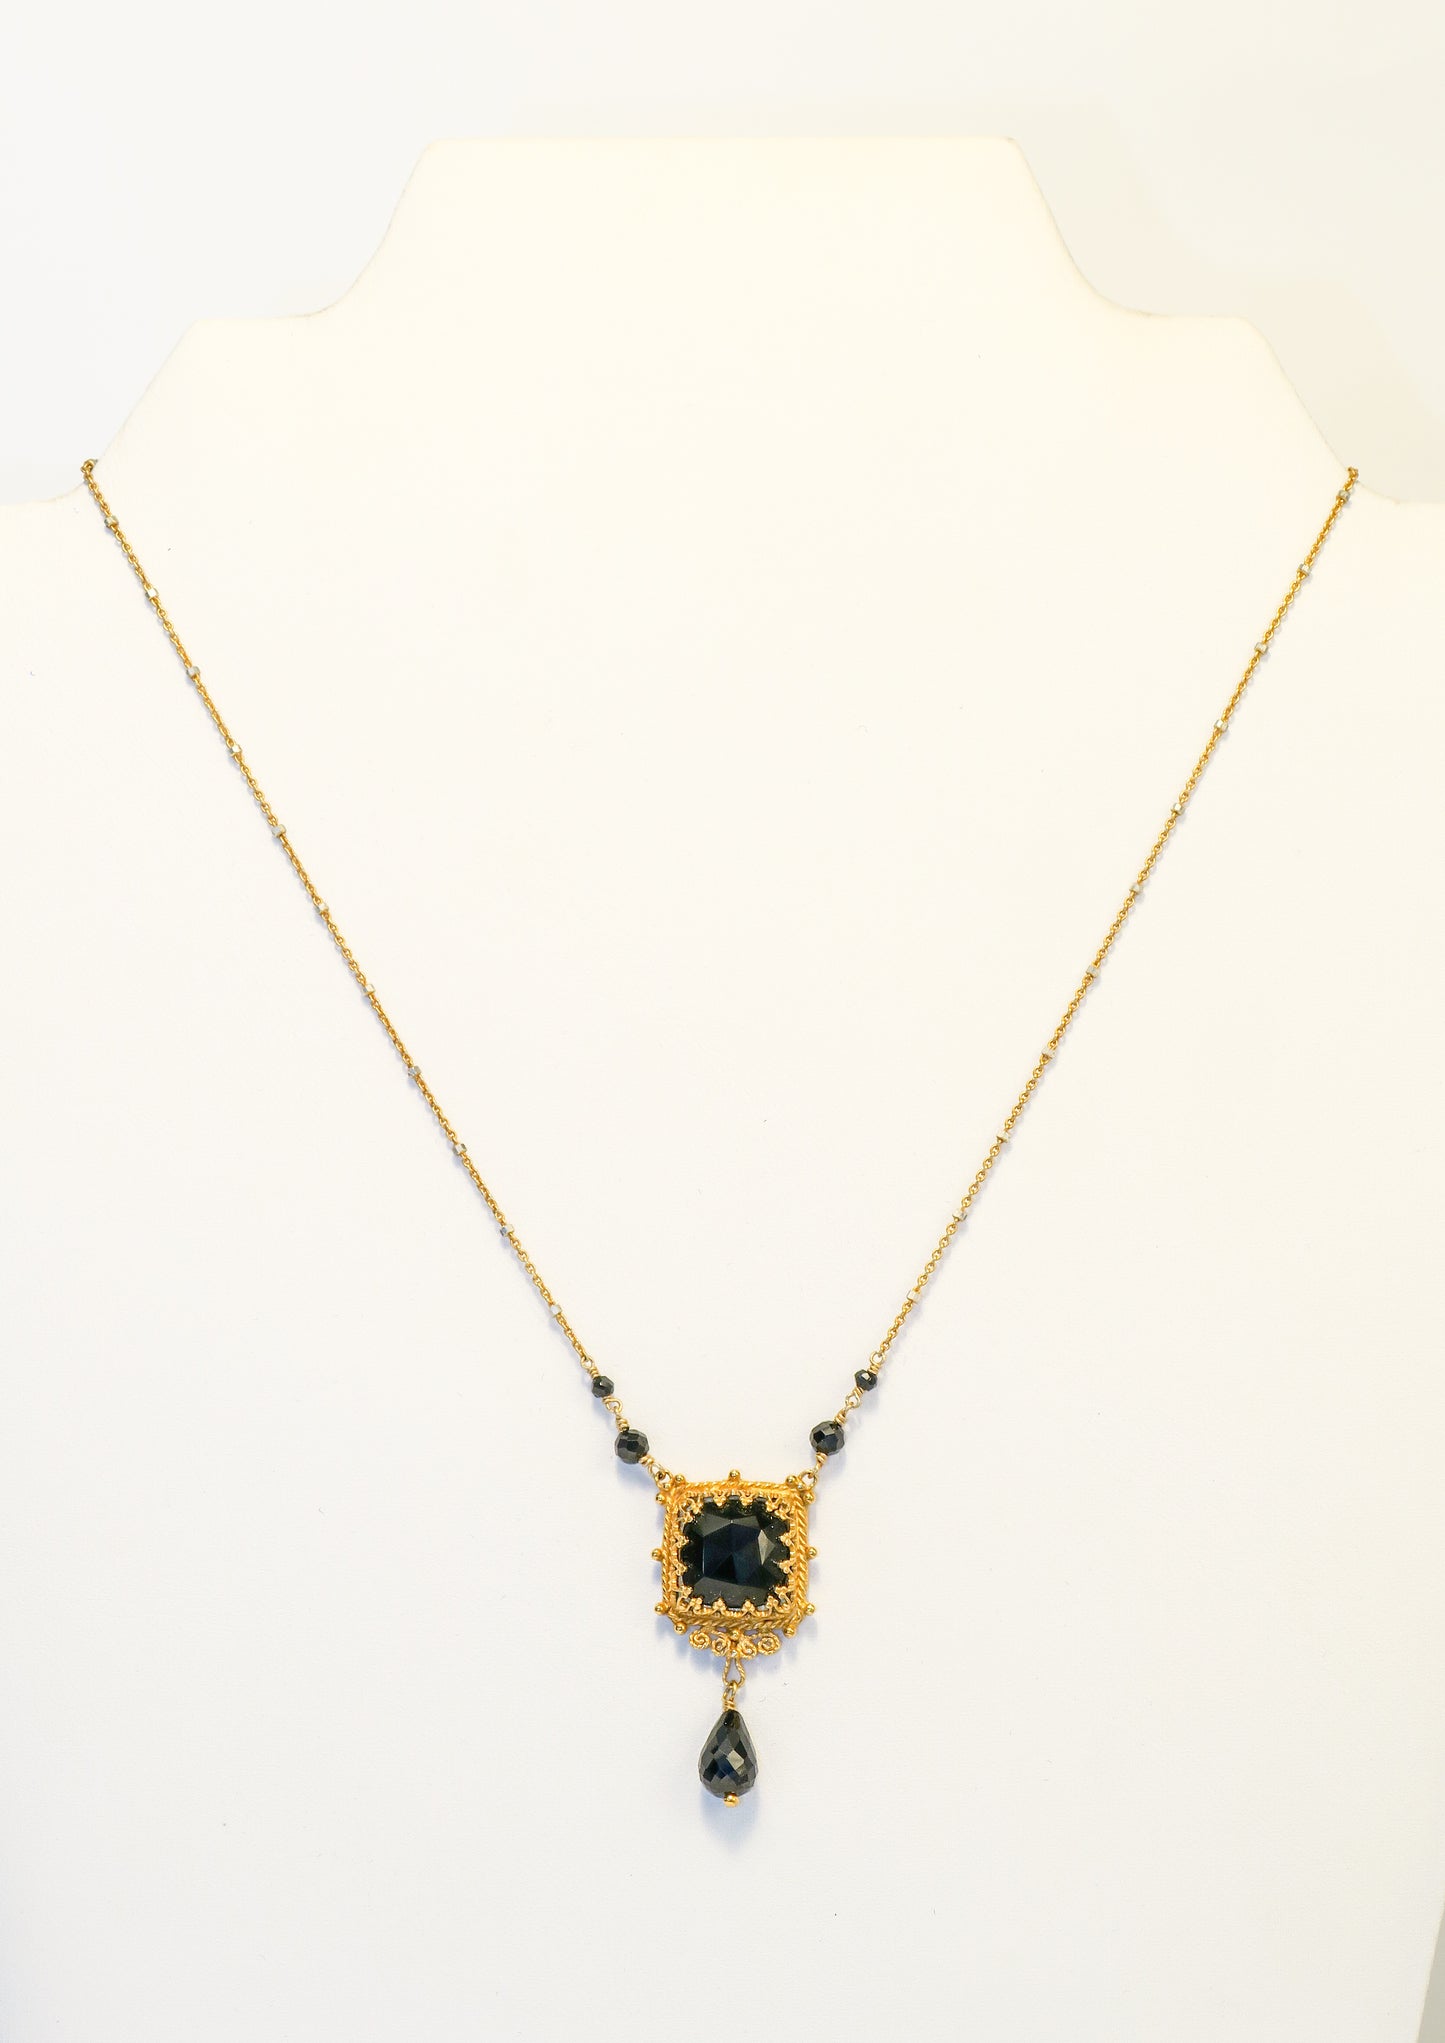 18K Gold Vermeil and Black Onyx Necklace | by Vanessa Mellet